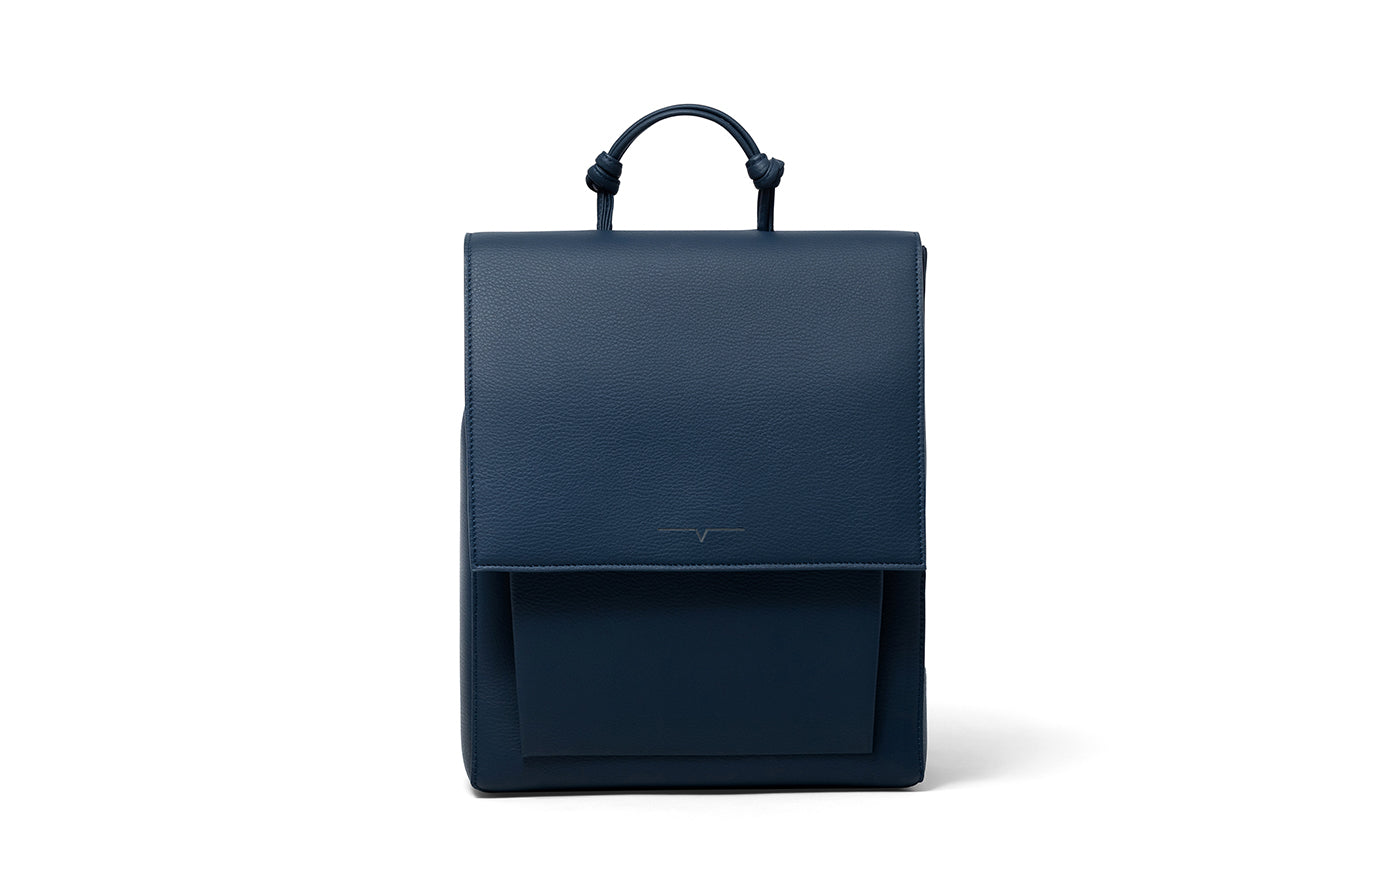 Von Holzhausen The Classic Backpack - Denim and Black - Blue